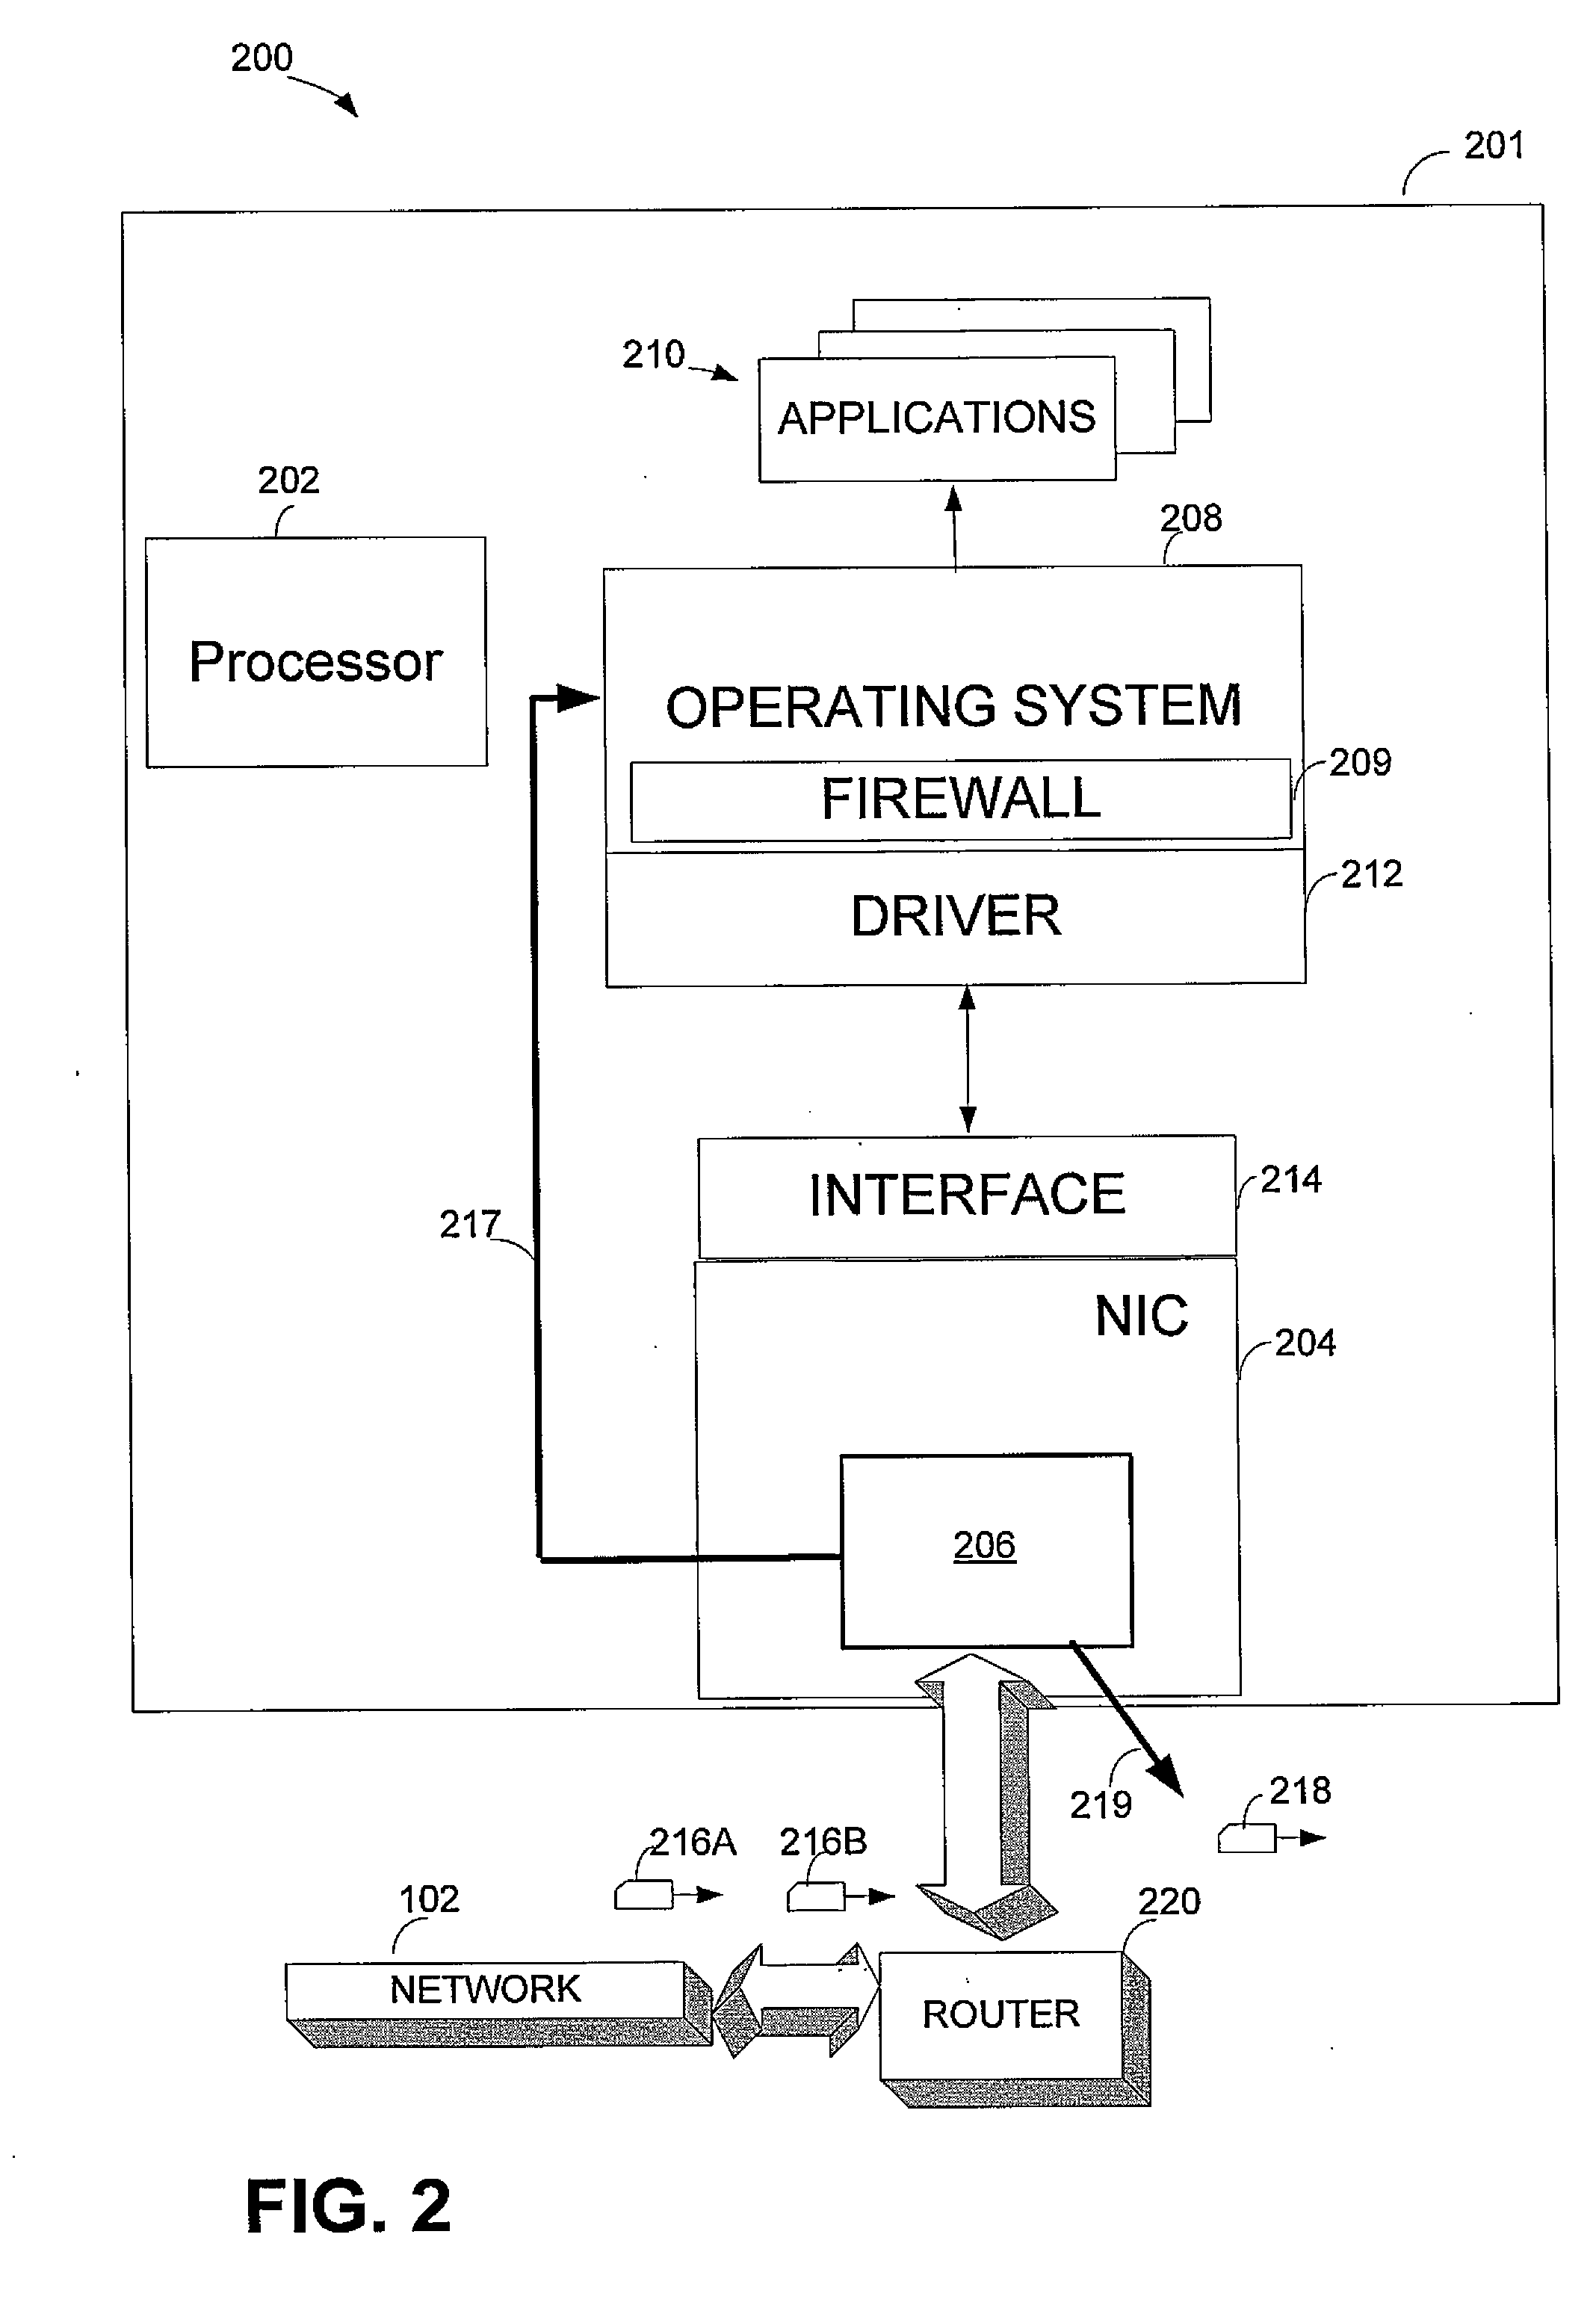 Mechanism to save system power using packet filtering by network interface